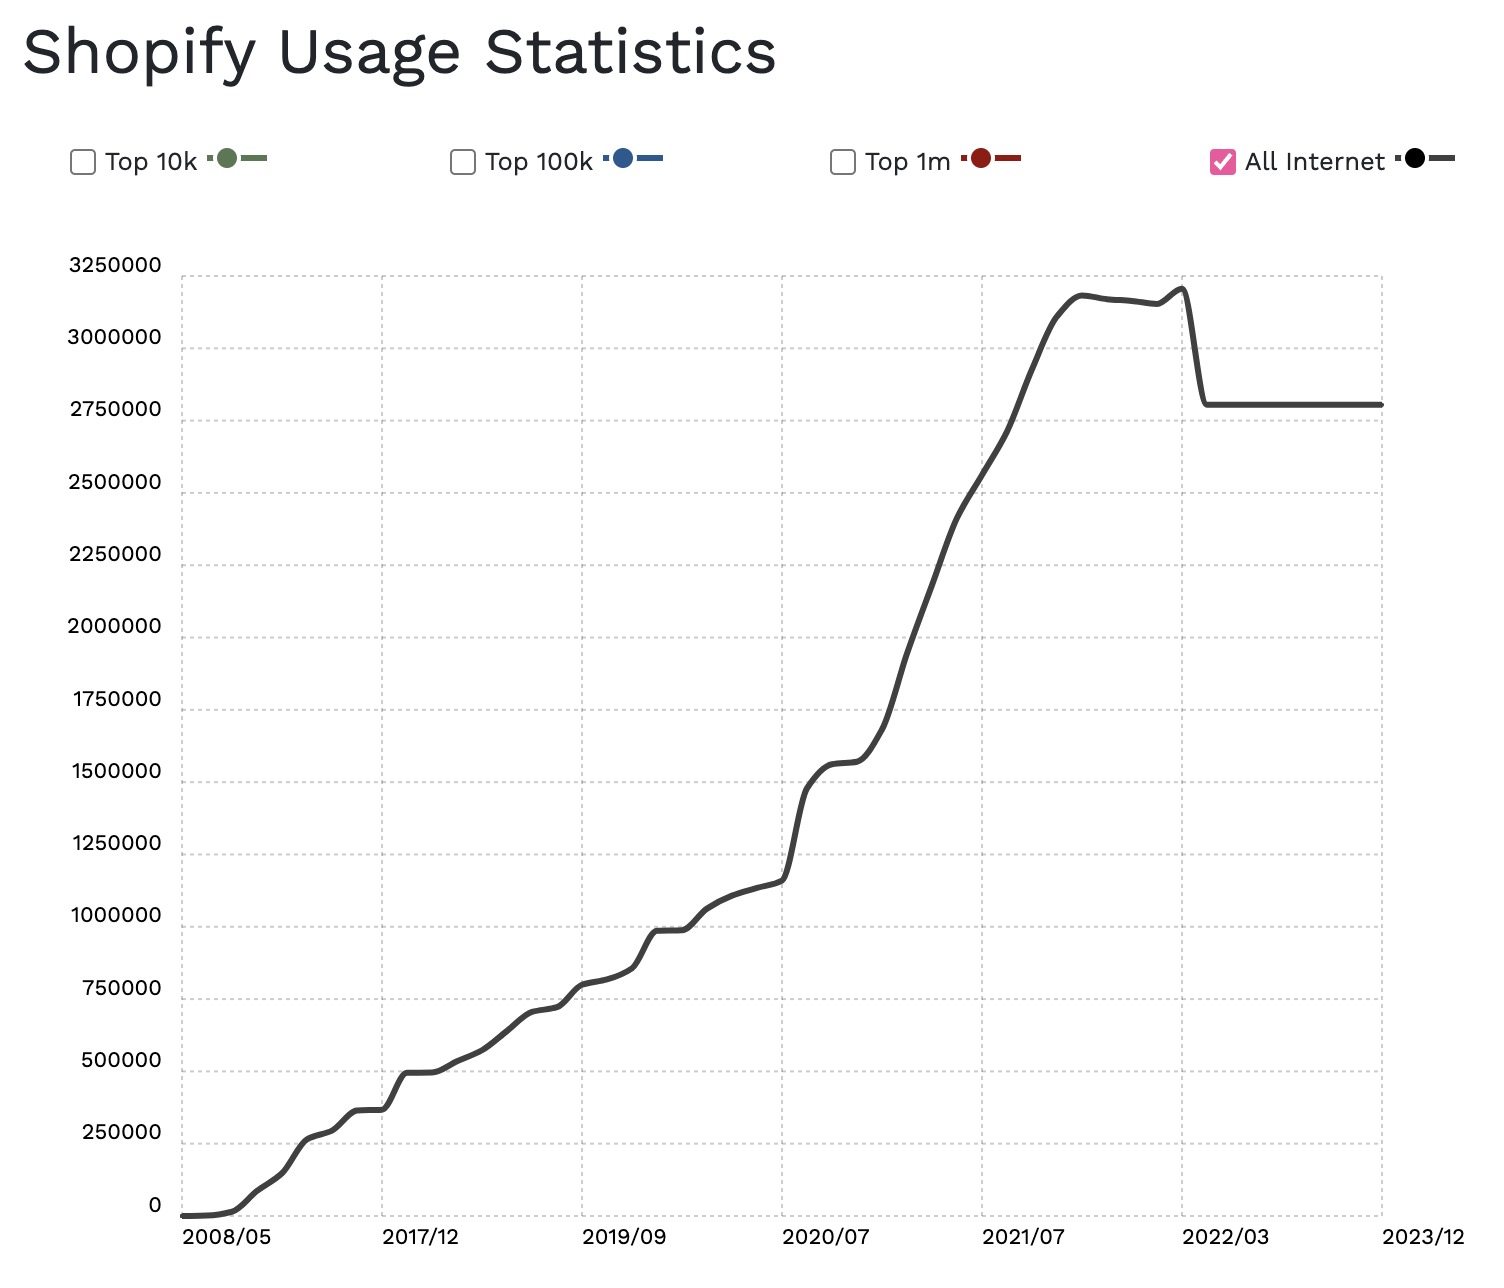 A line graph showing Shopify usage has gone up over the years and experienced a dip since around 2022